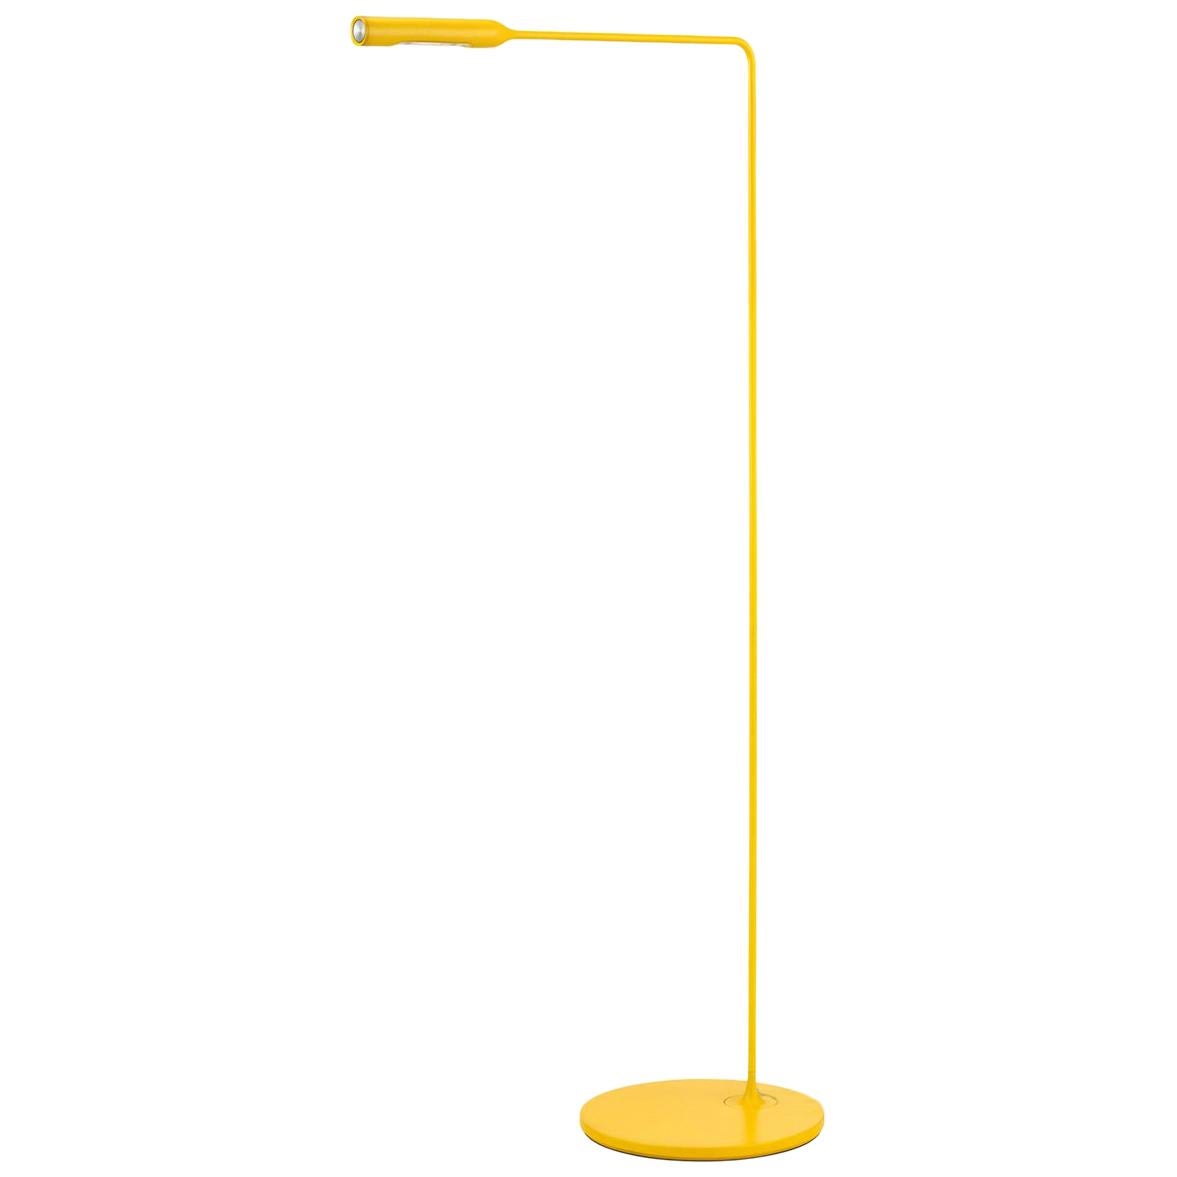 Lumina Flo Lounge Floor Lamp in Matte Yellow by Foster+Partners